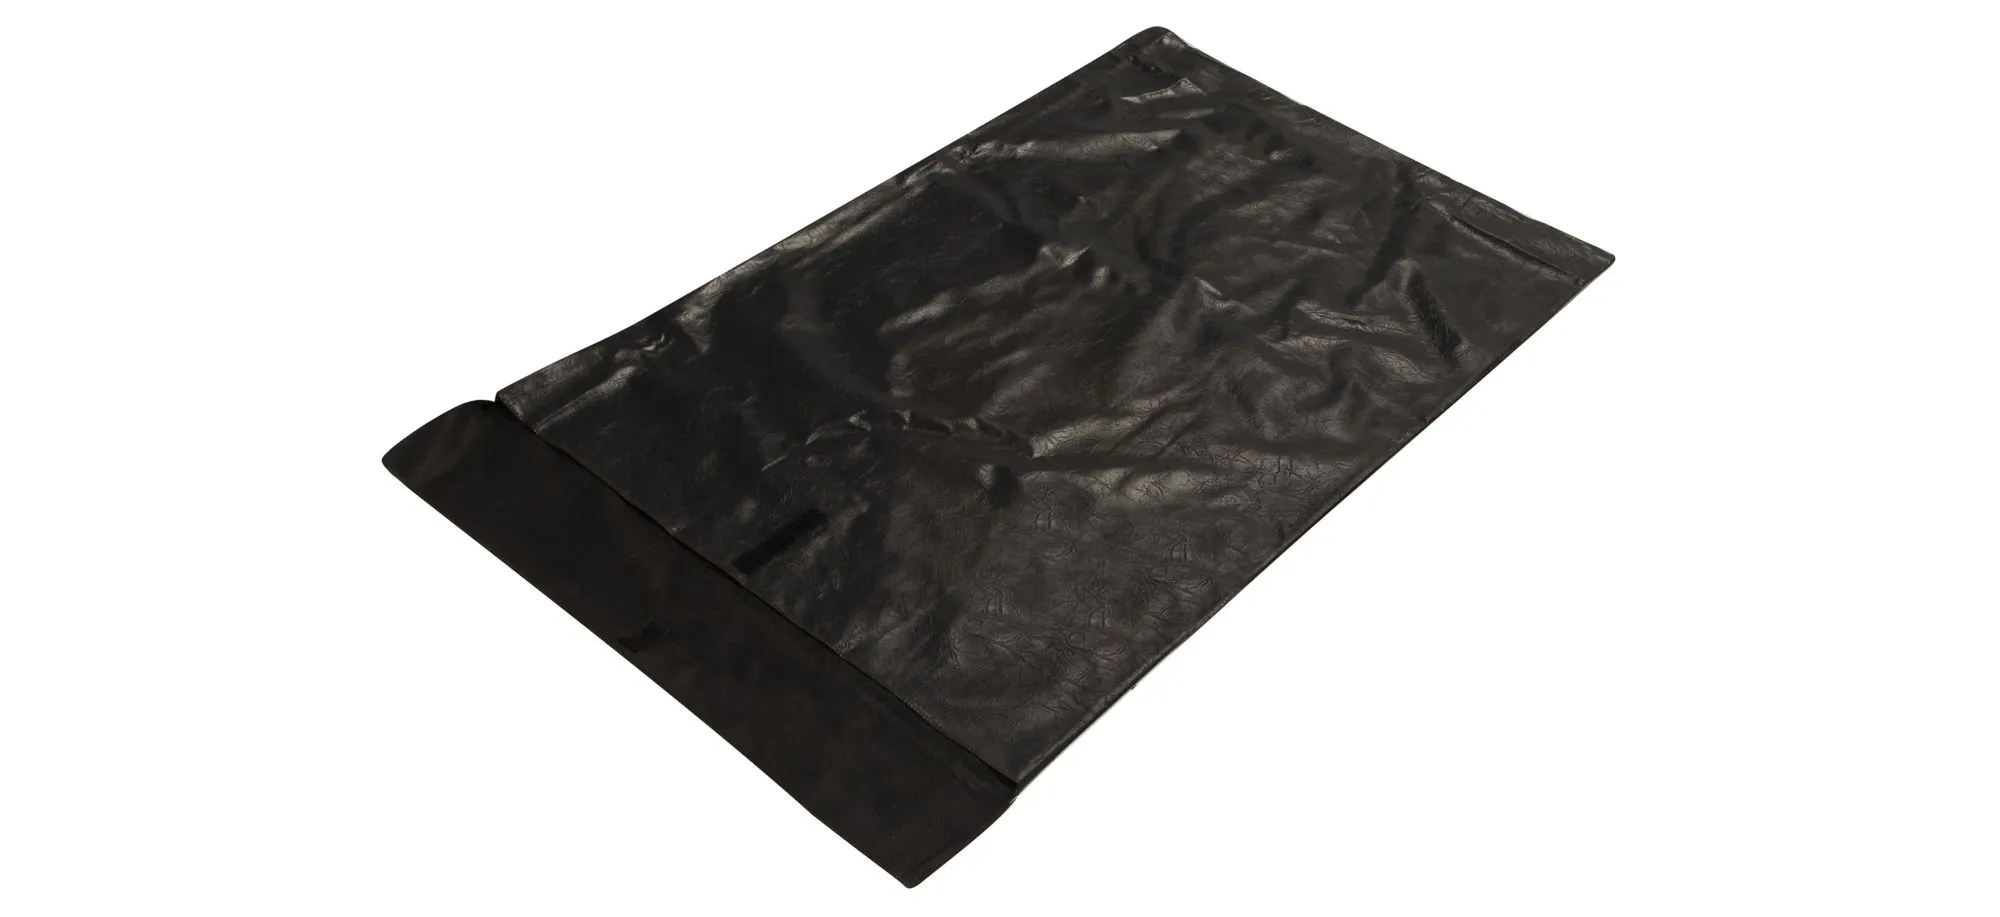 Dining Table Protector Storage Bag in Black by International Table Pads